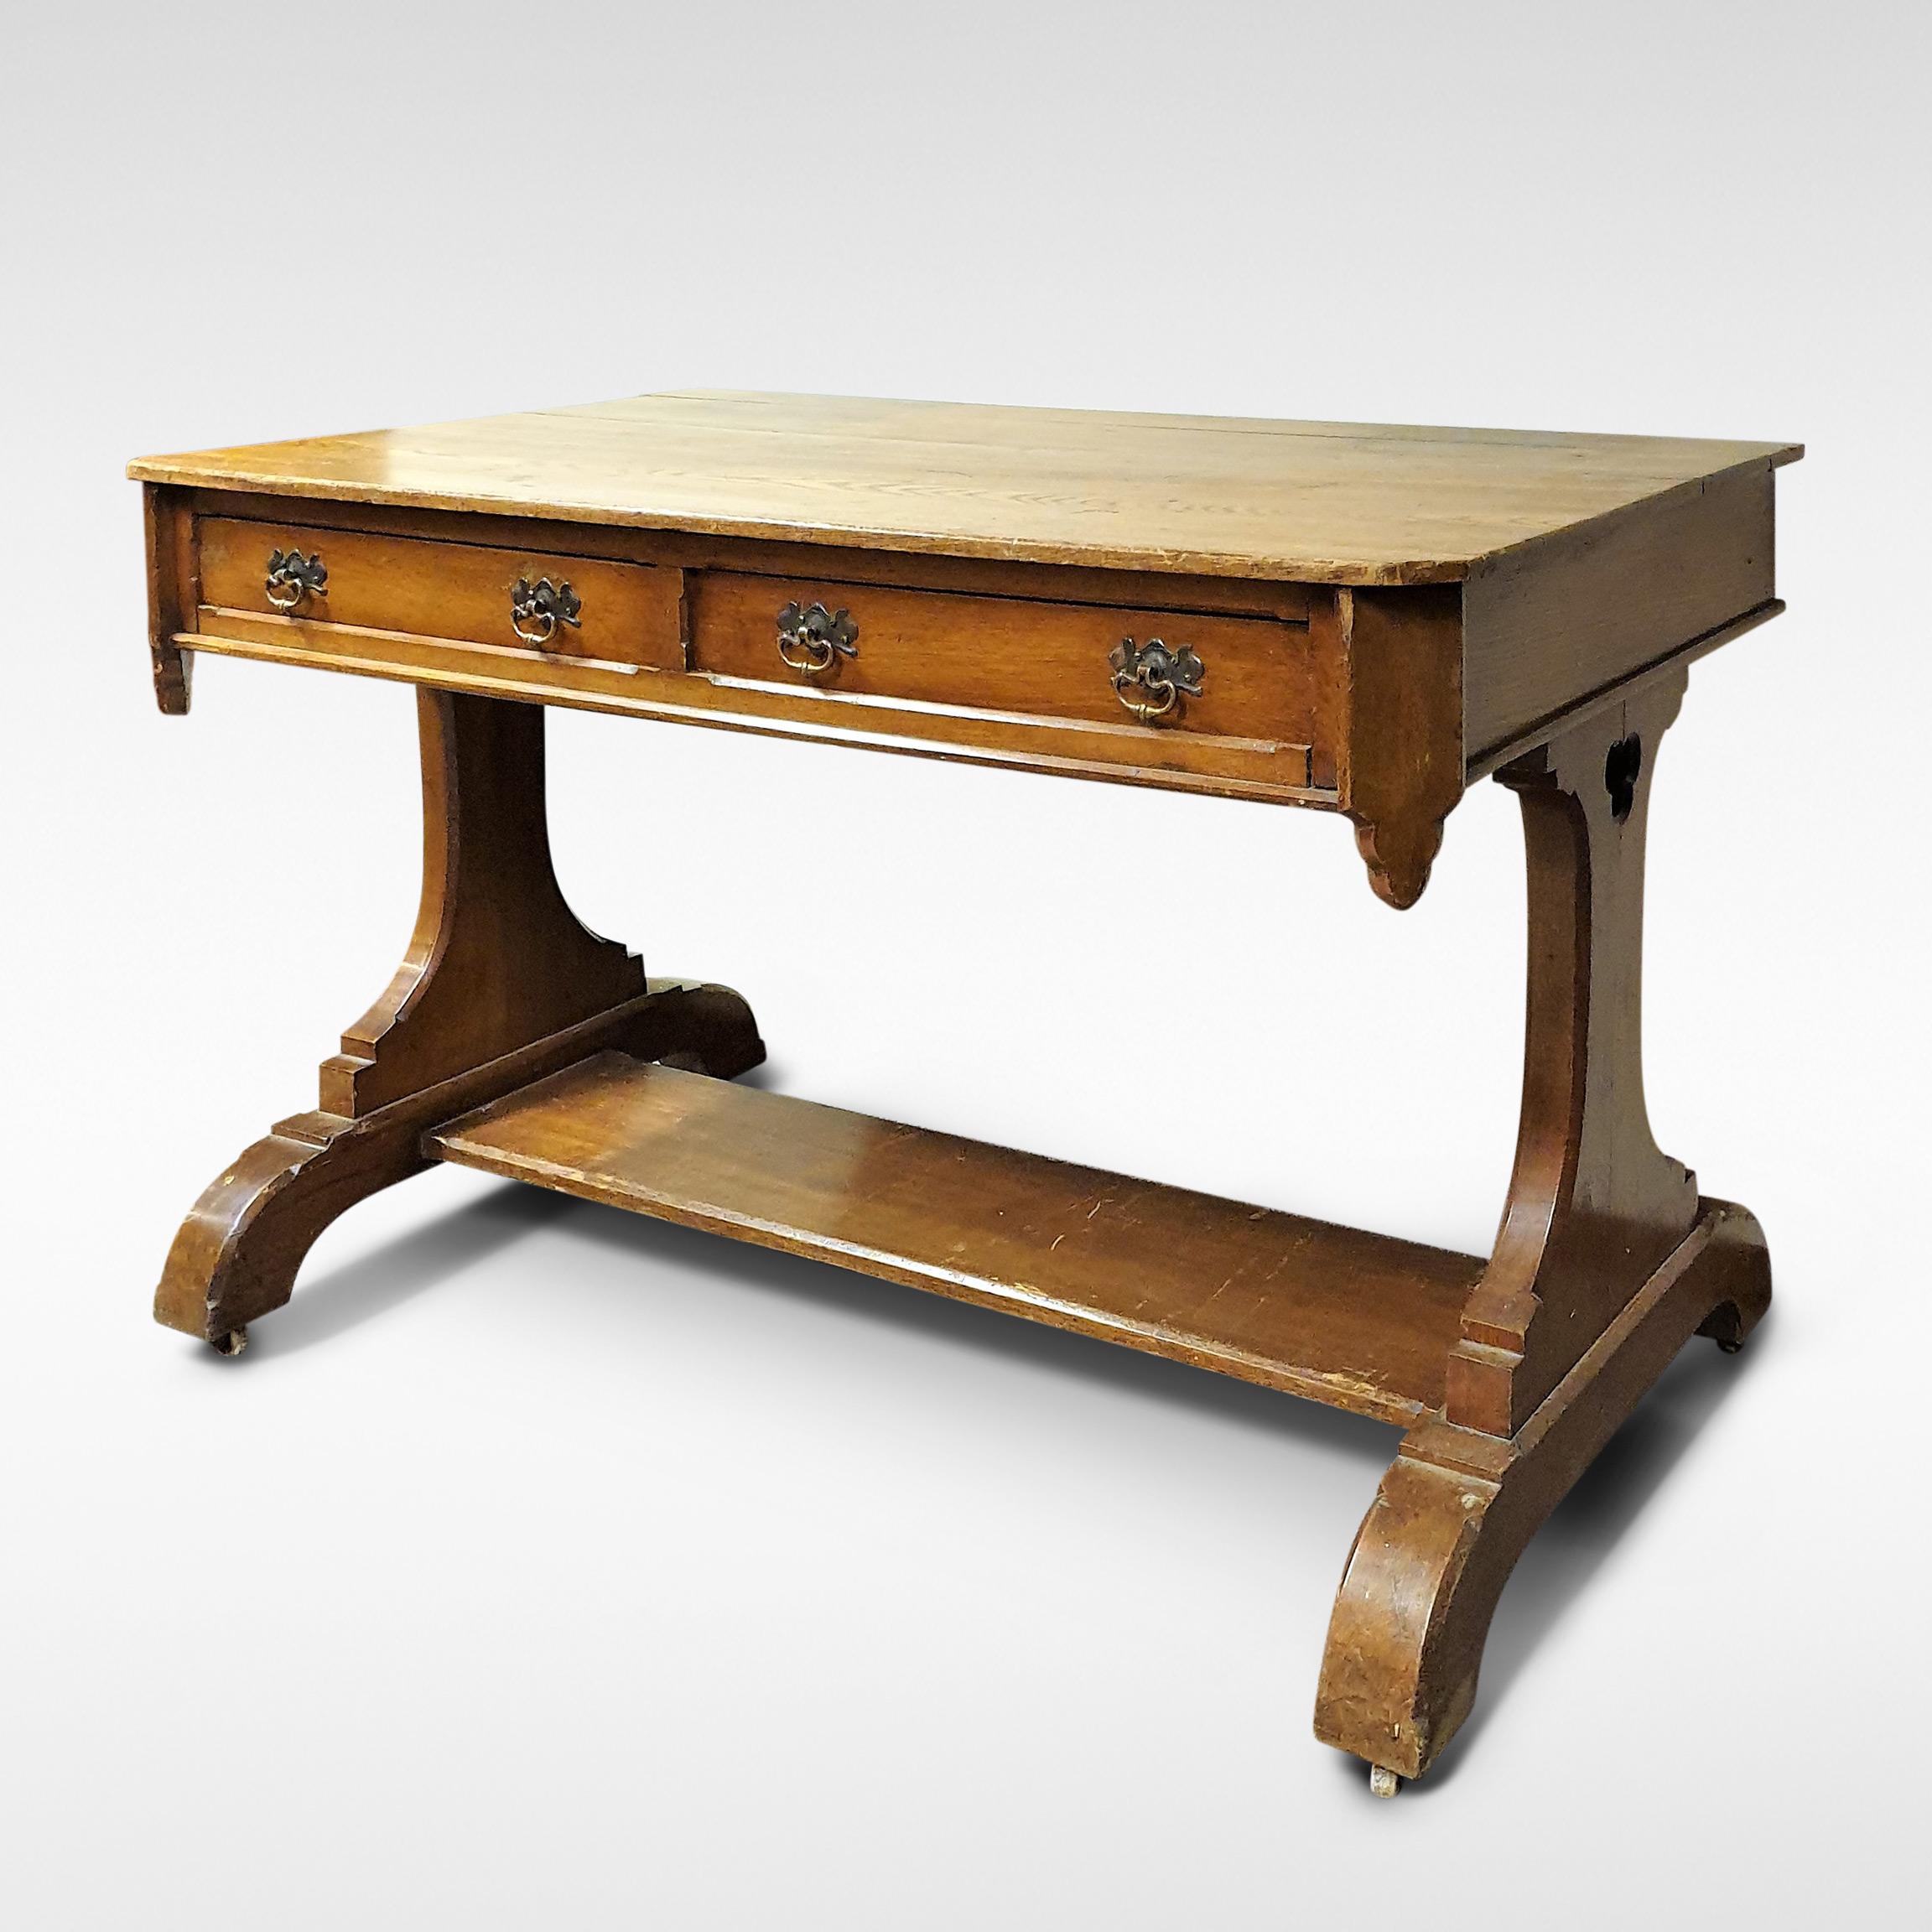 British Arts & Crafts Writing Table in Gothic Revival Style